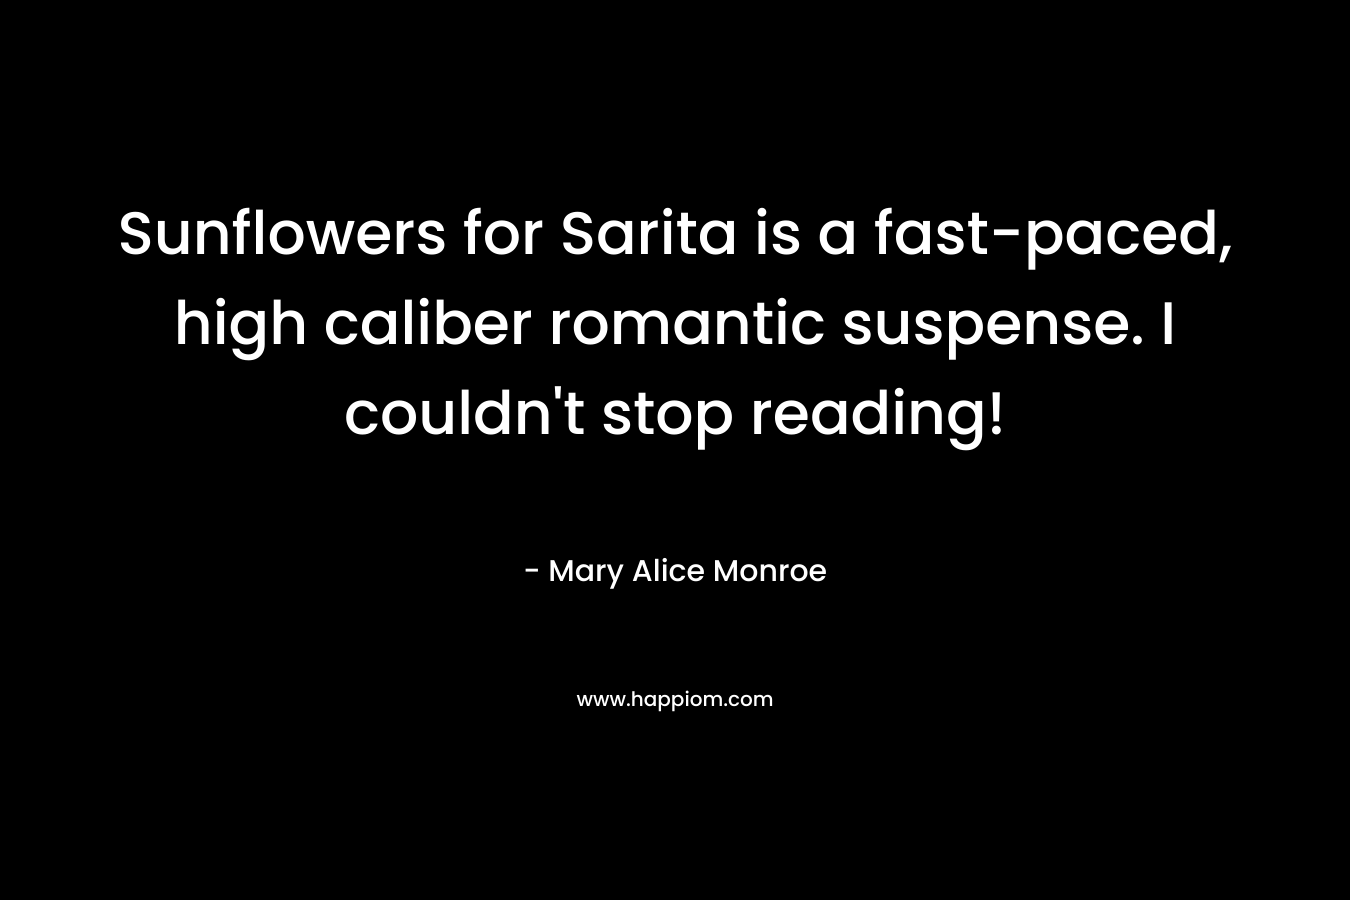 Sunflowers for Sarita is a fast-paced, high caliber romantic suspense. I couldn’t stop reading! – Mary Alice Monroe